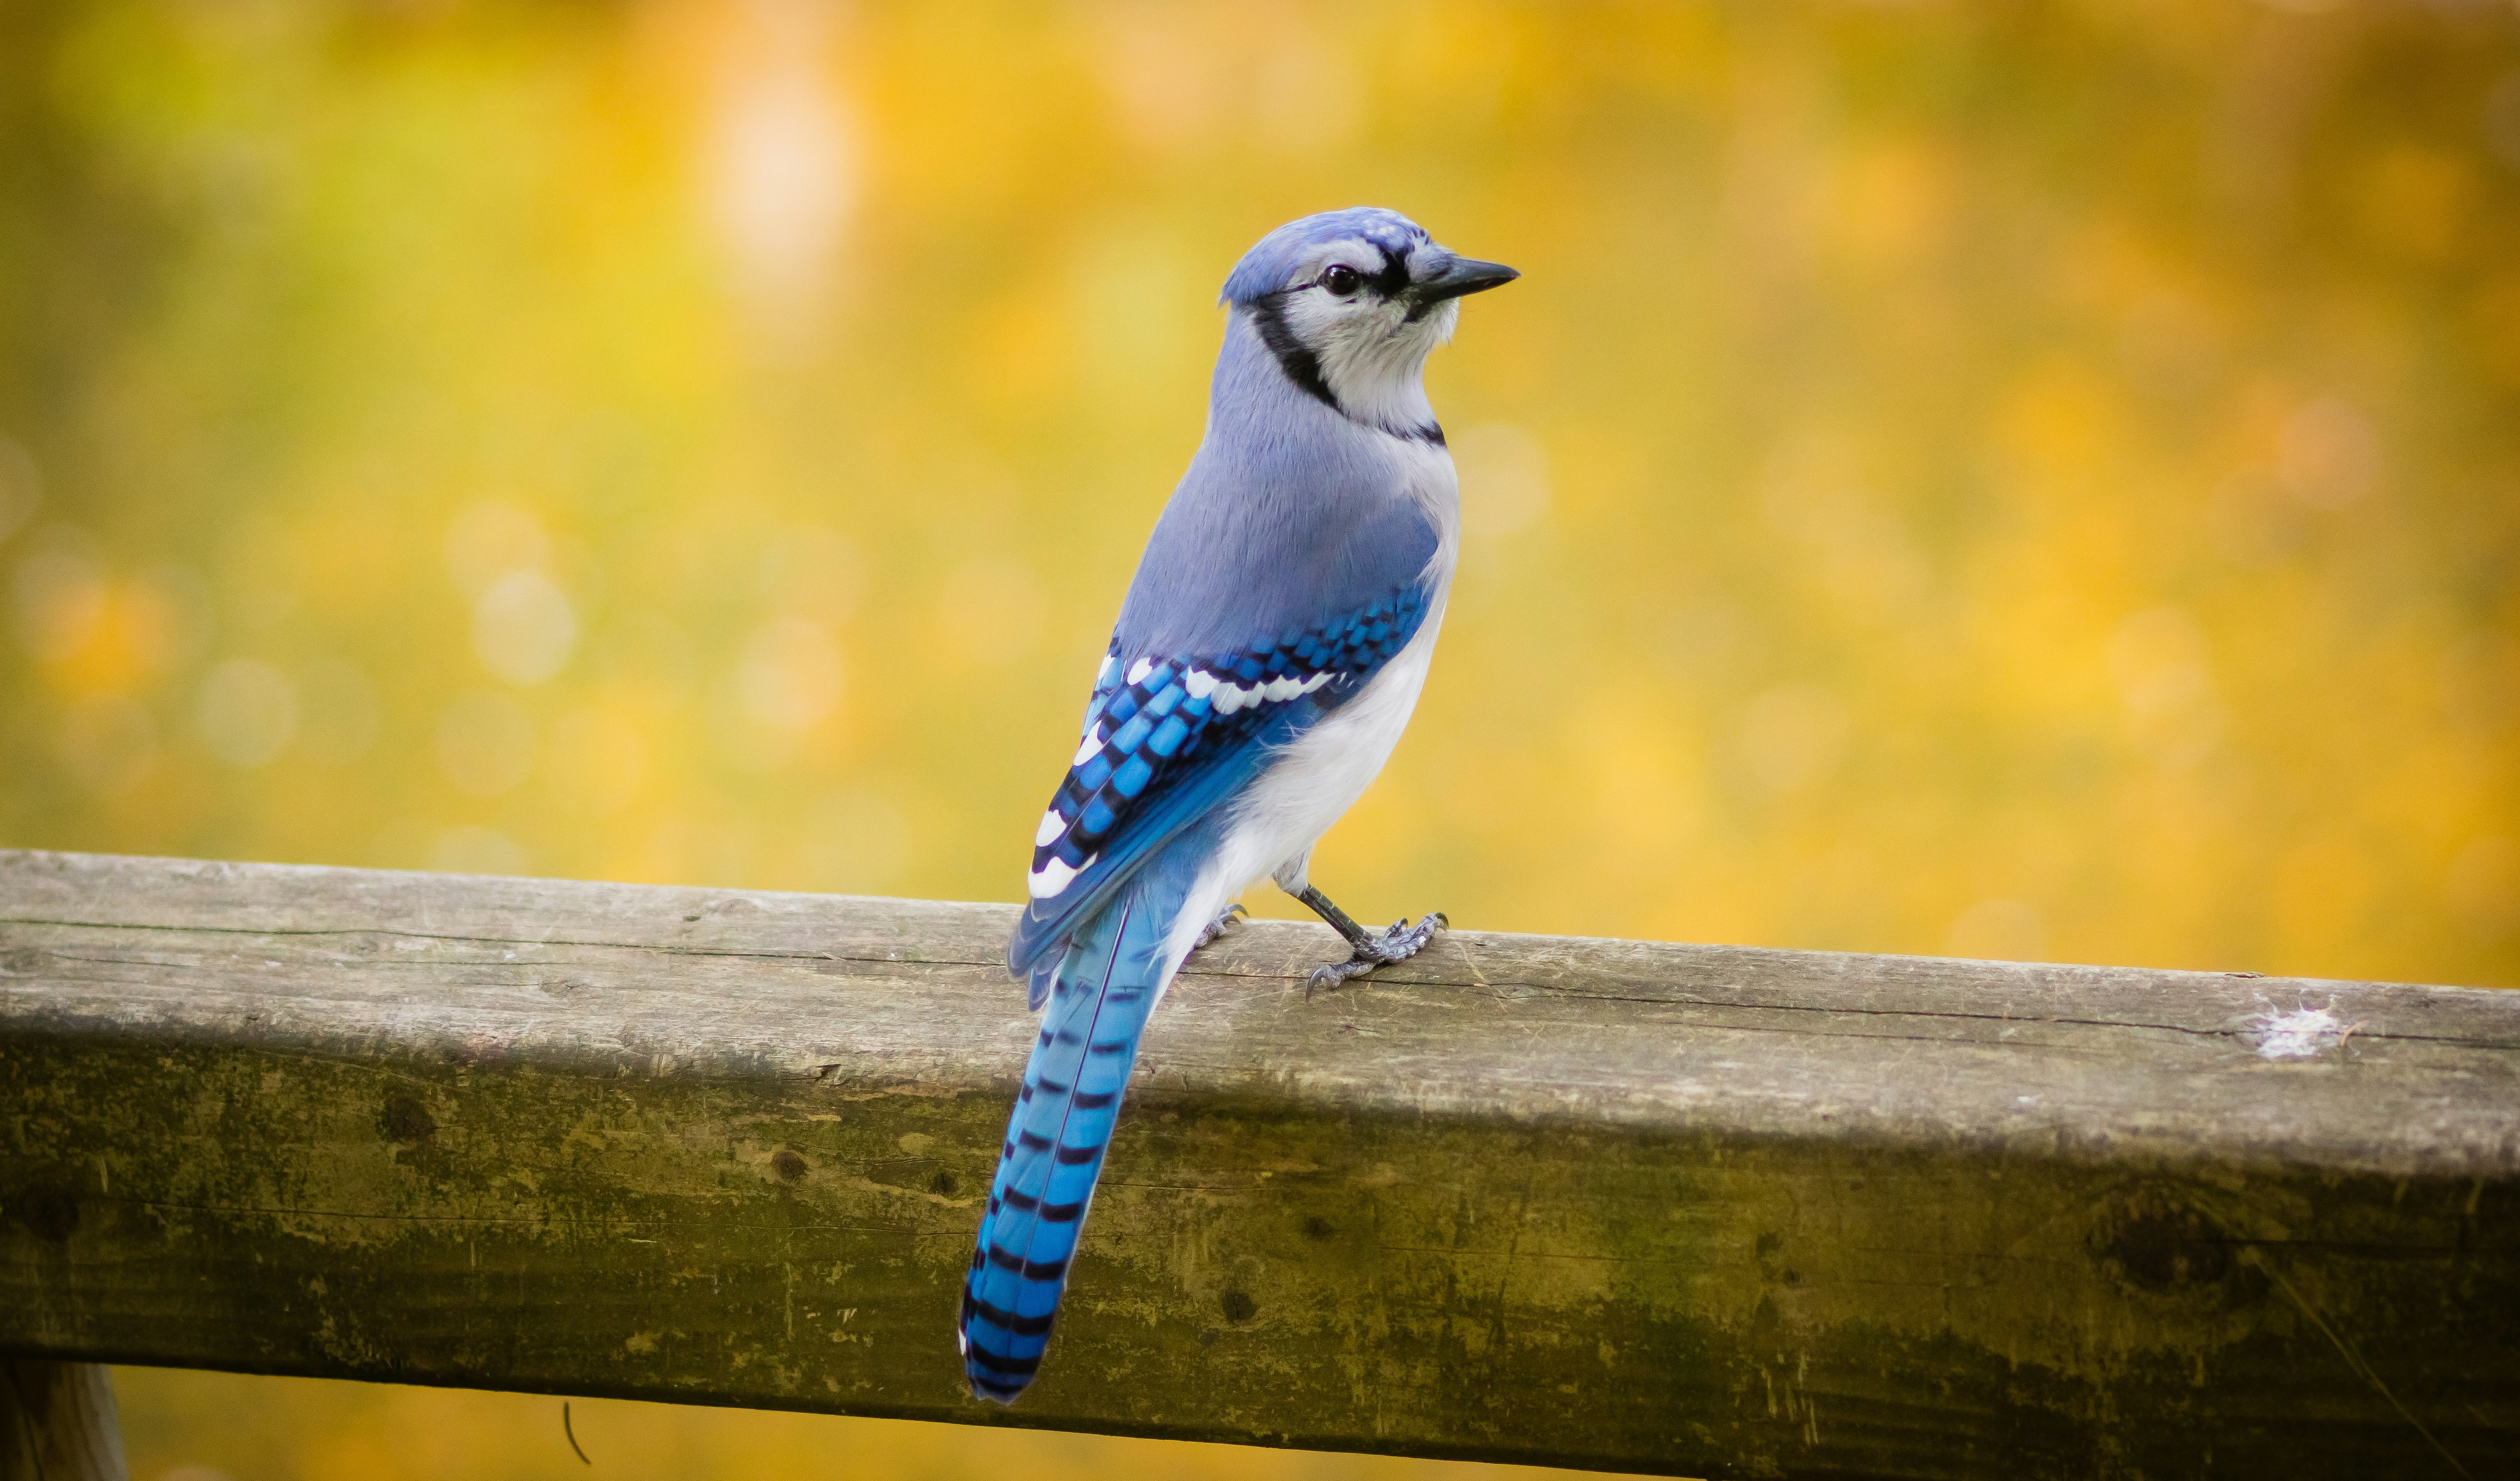 blue and white bird on brown wooden surface